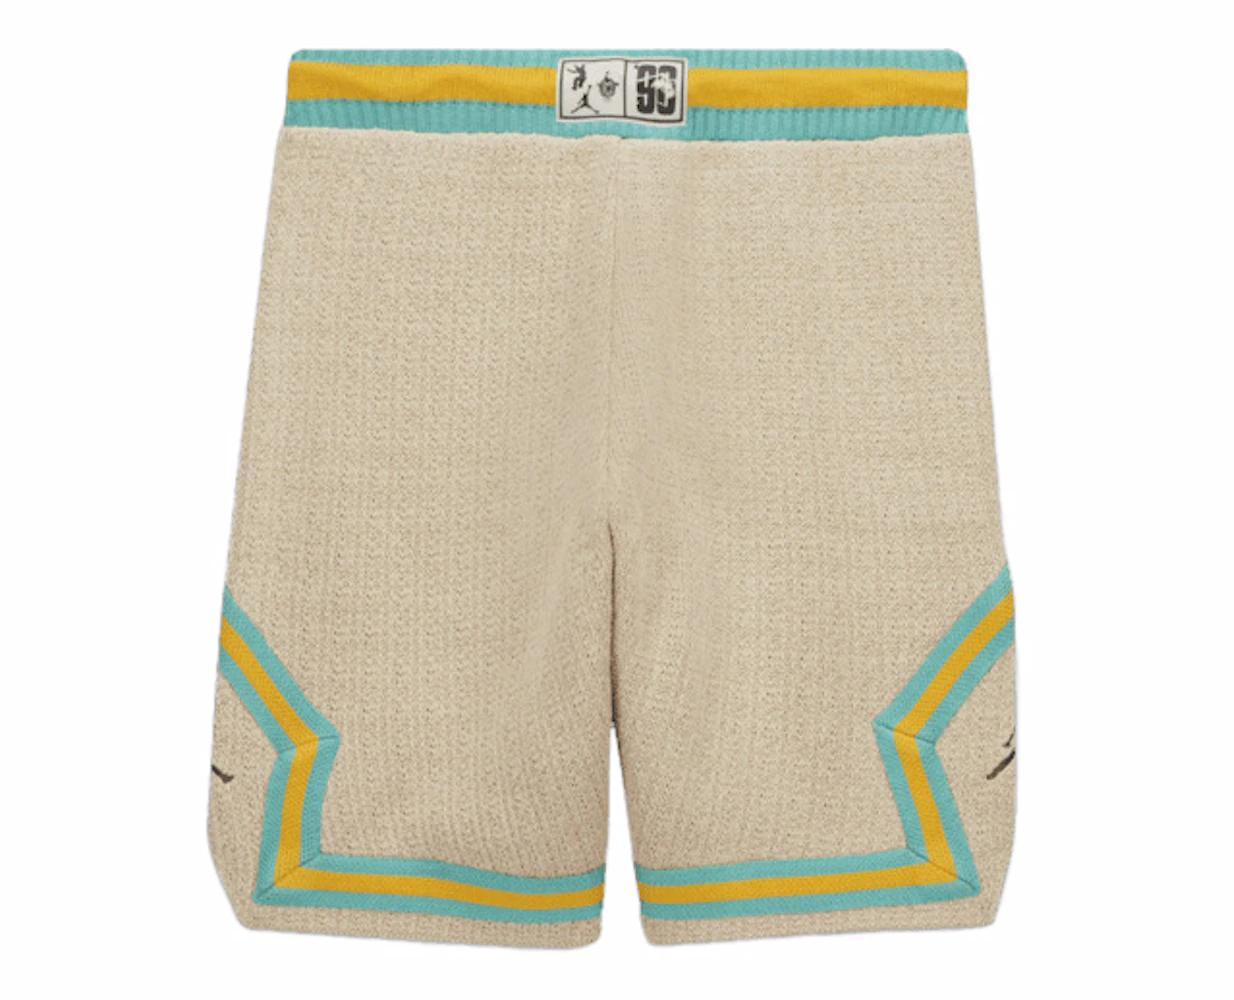 Shorts Bephies Men\'s FW23 US Supply Jordan x Brown/Washed - x UNION Baroque Beauty Teal - Diamond